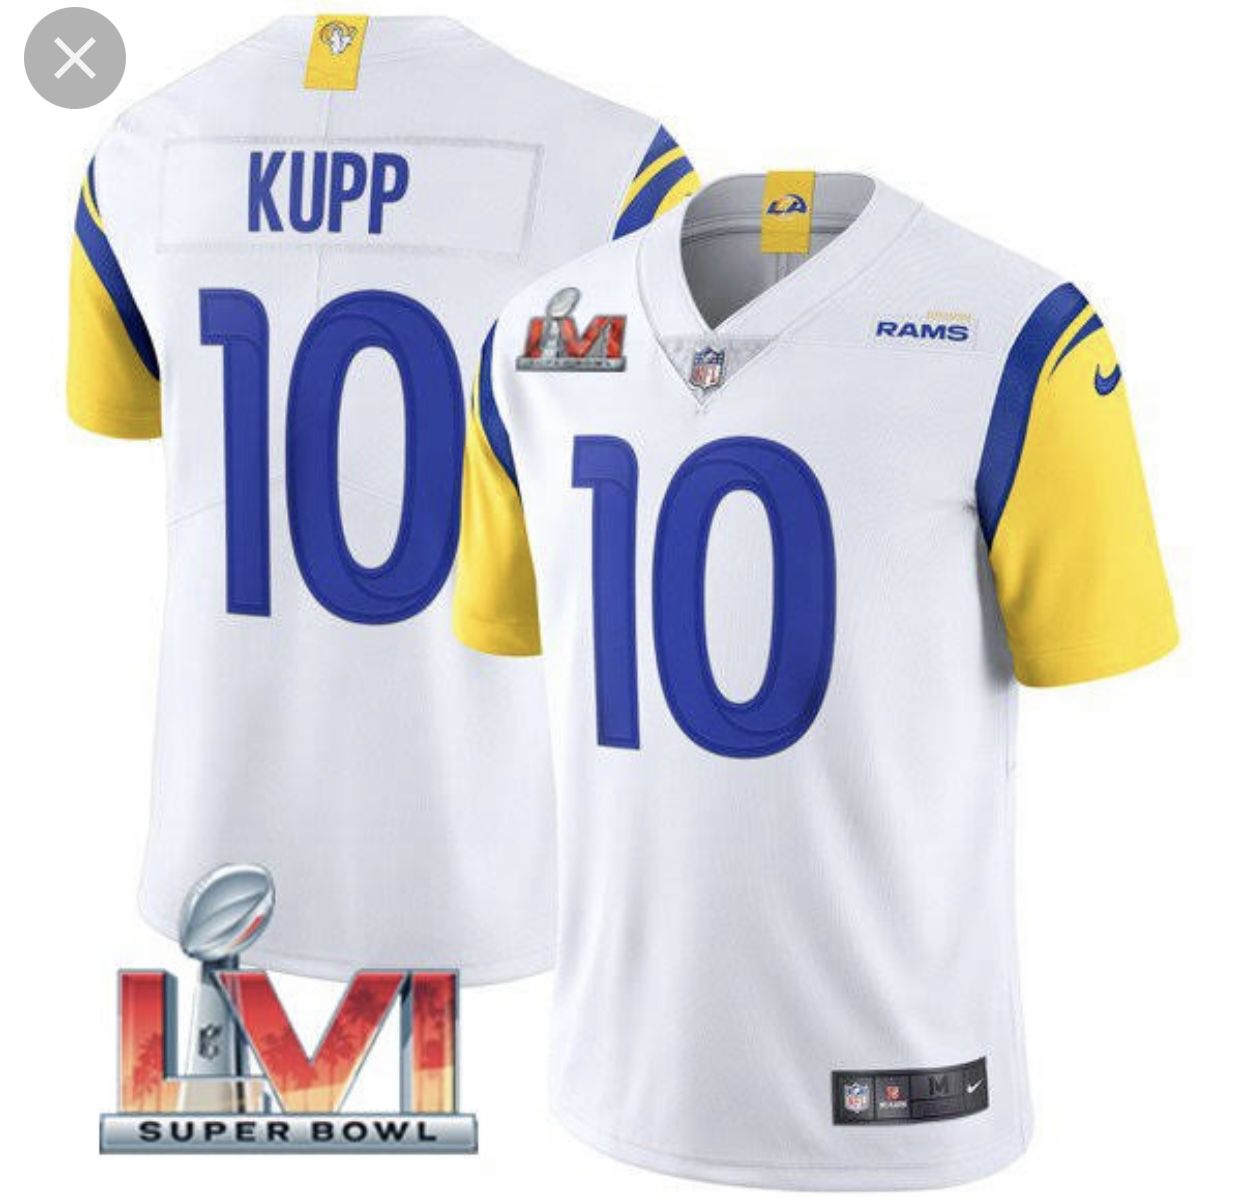 Rams Cooper Kupp Super bowl Jersey for Sale in Long Beach, CA - OfferUp